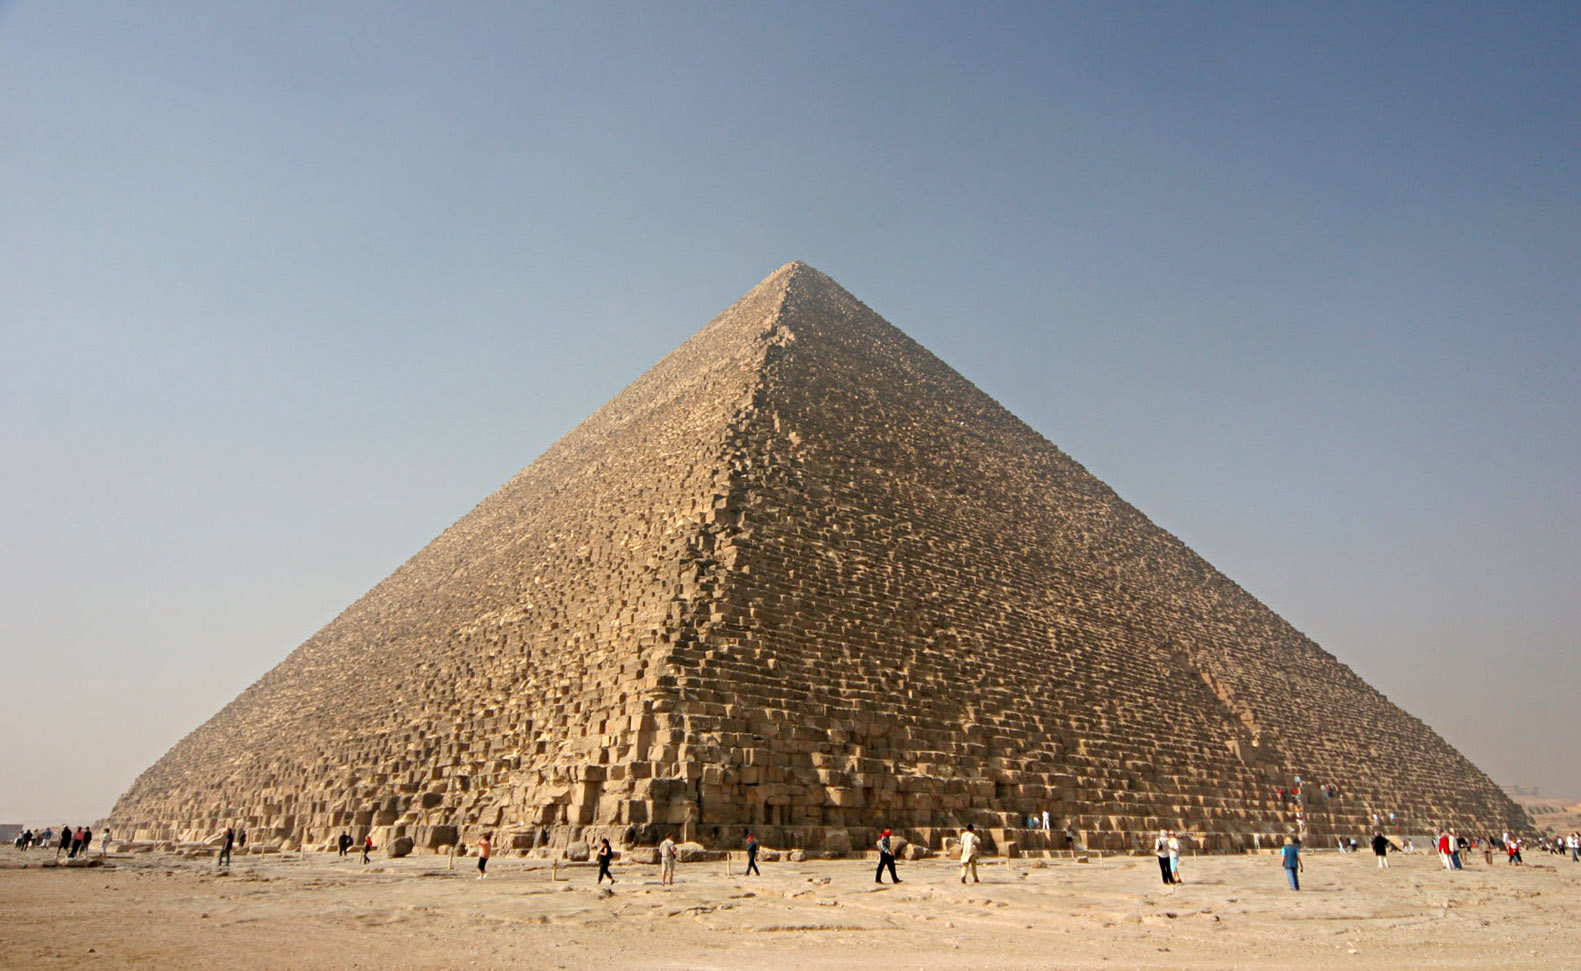 Archeologists are Planning to Scan the Great Pyramid of Giza With Cosmic Rays Wi..